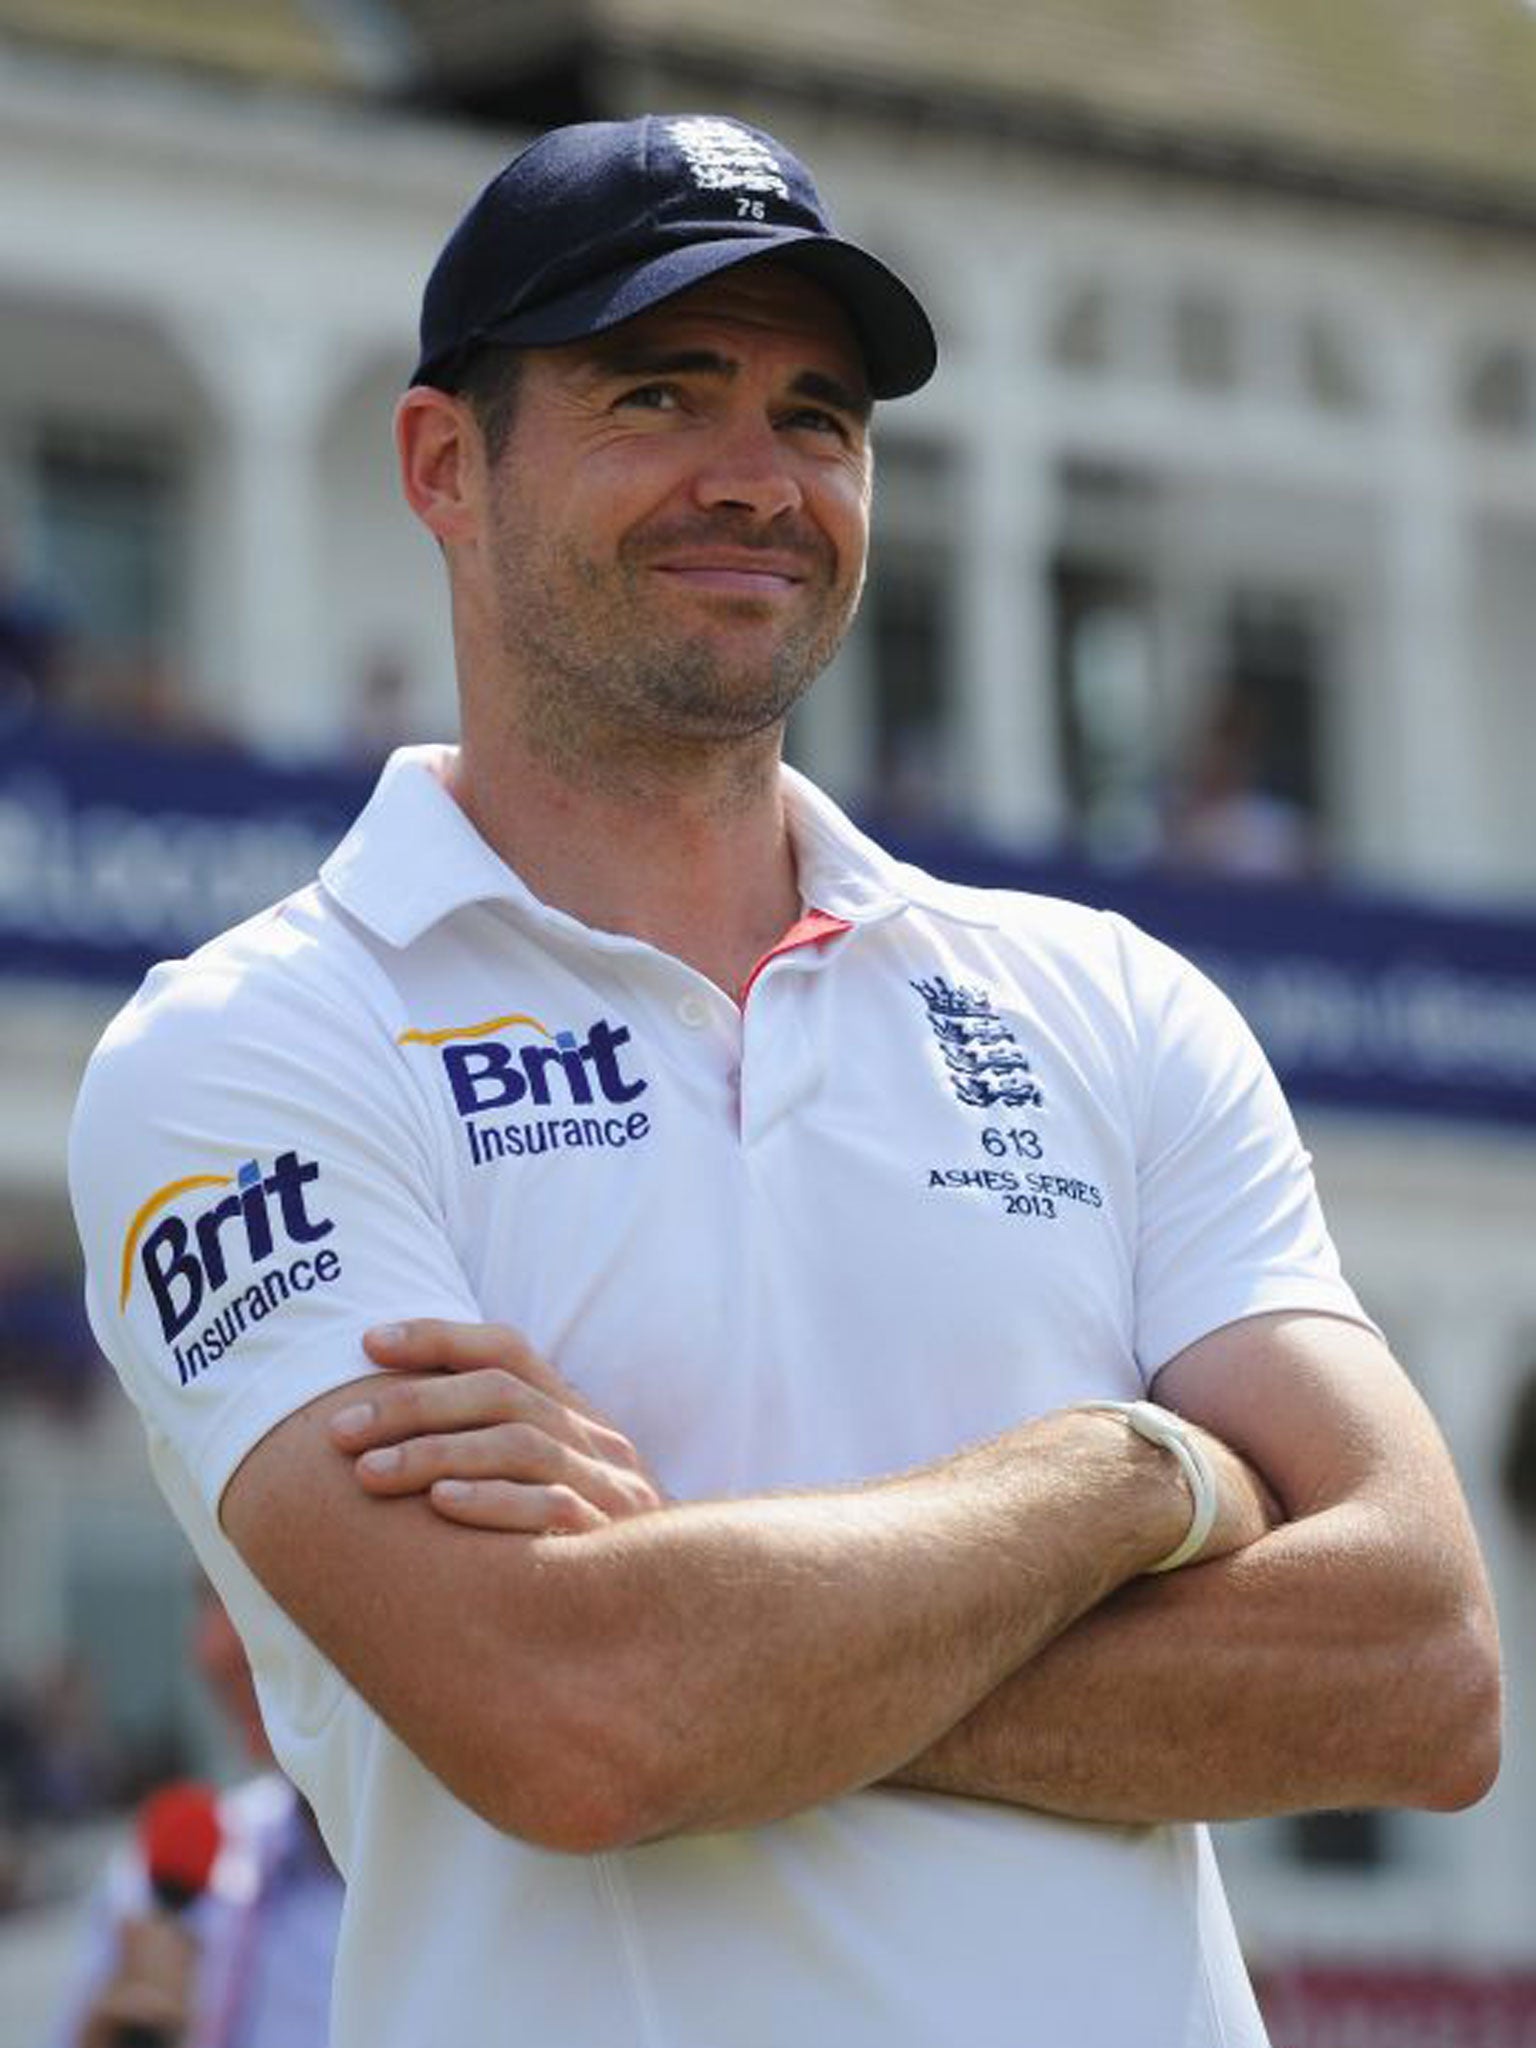 James Anderson – 9<br/>

With 5-wicket hauls in both innings, it was no surprise Anderson was named man of the match. Moved up to third in England’s all-time wicket takers list and was a constant threat to Australia’s batsmen. England will be praying he s